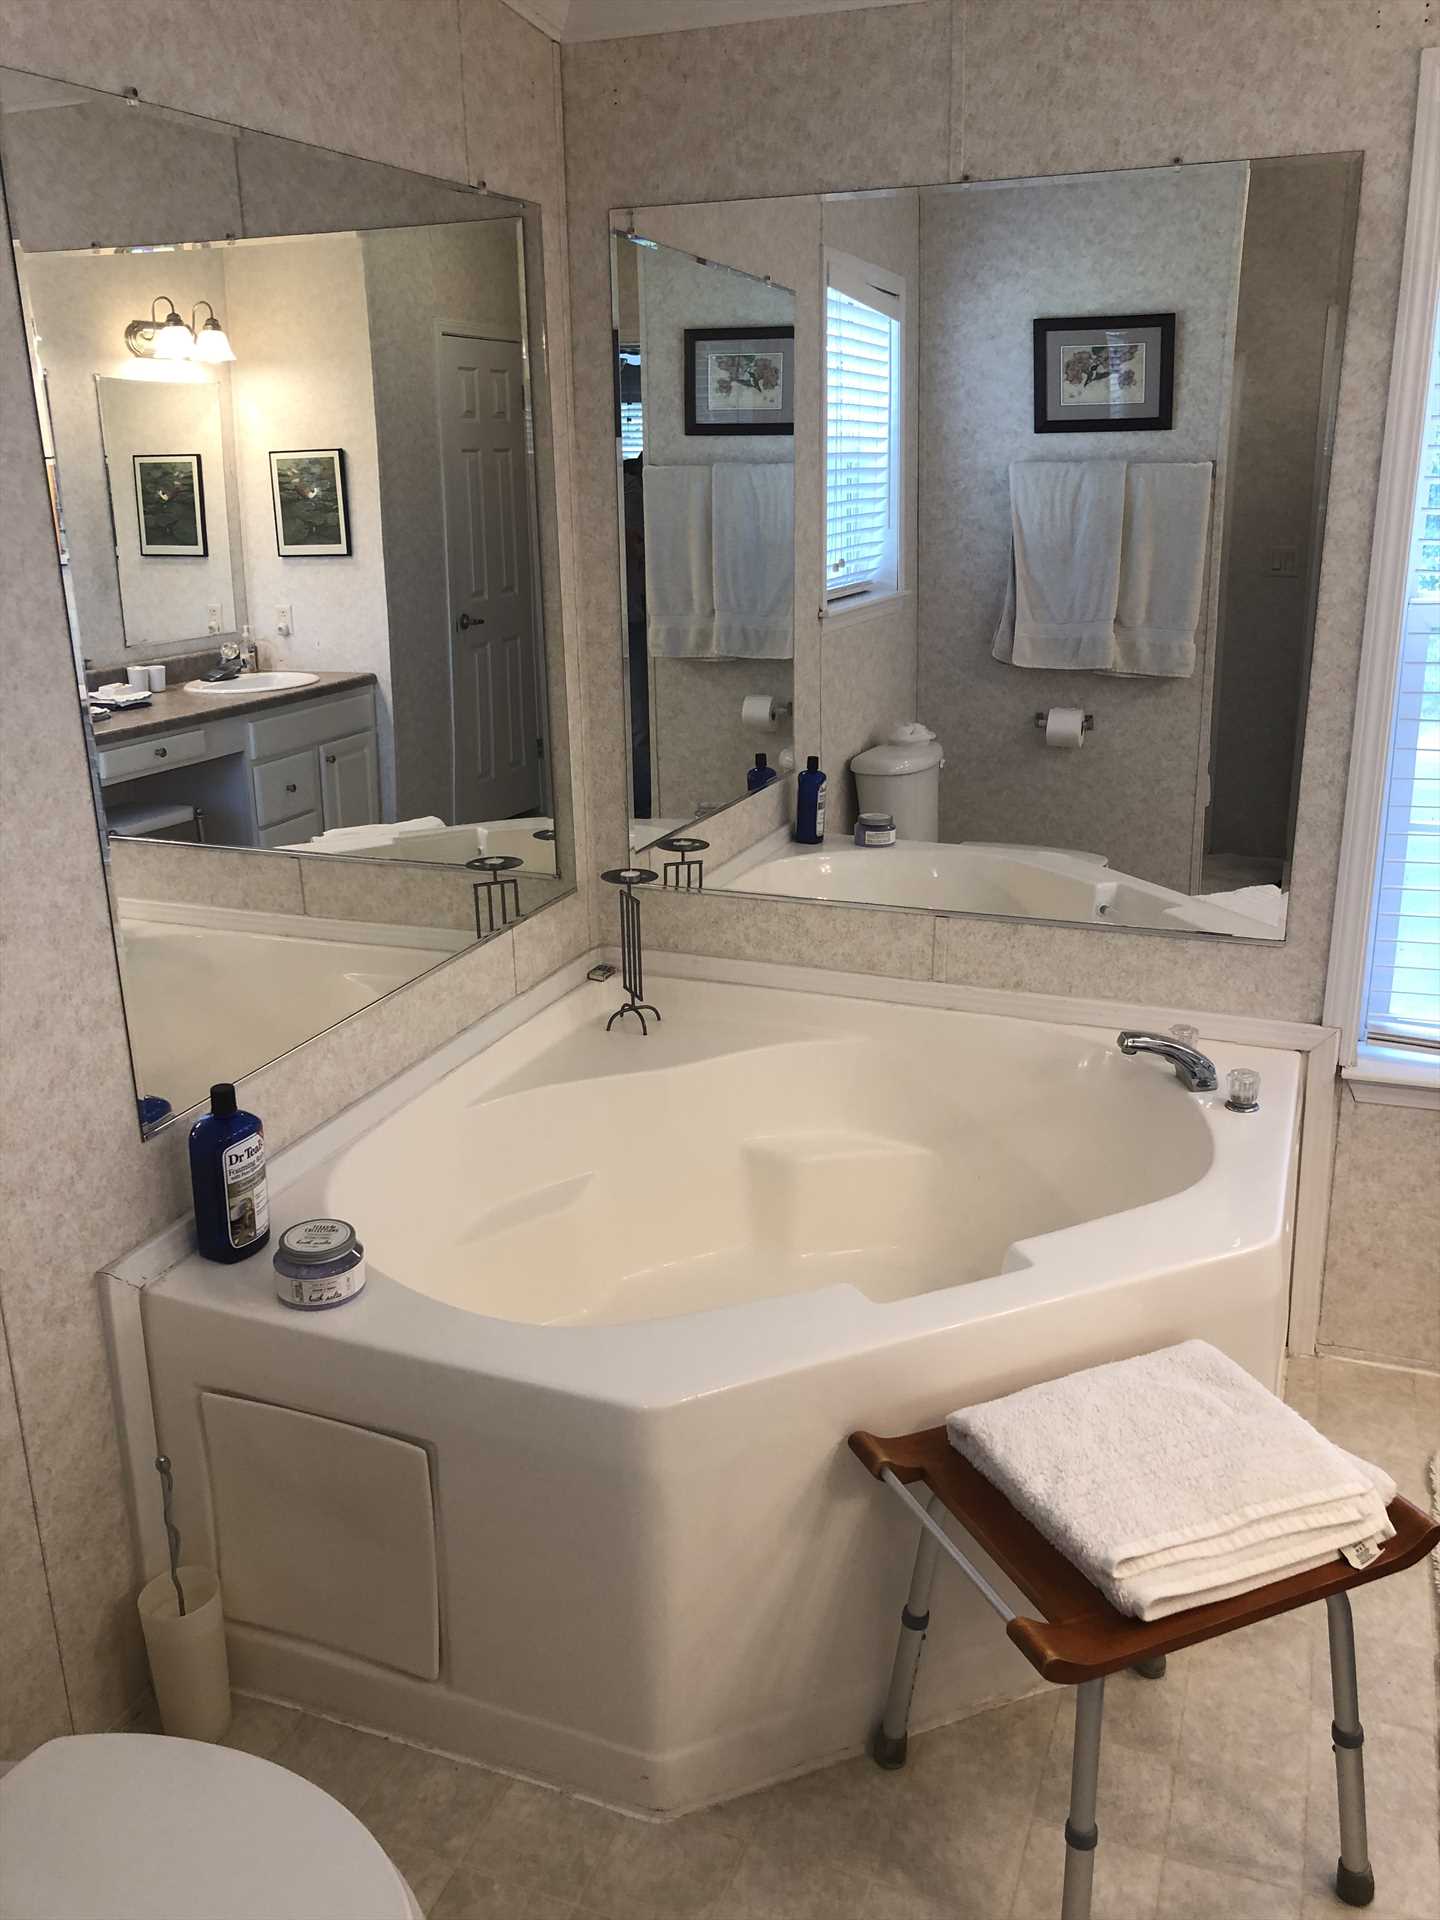                                                 Sink into some soothing suds in the enormous custom tub in the master bath! There's a shower here, too, for quick and easy cleanup.